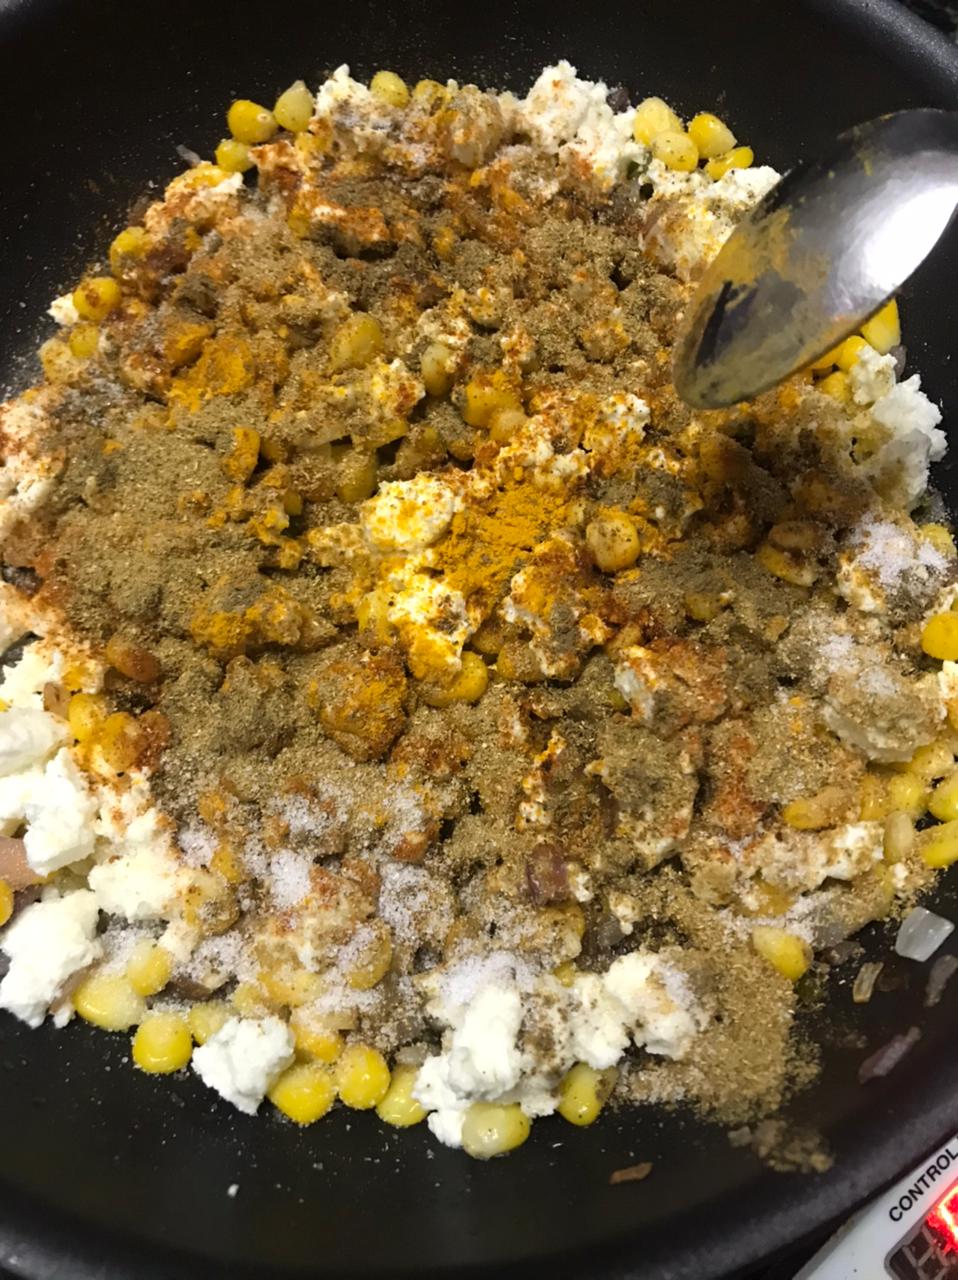 adding spices to the paneer corn mix